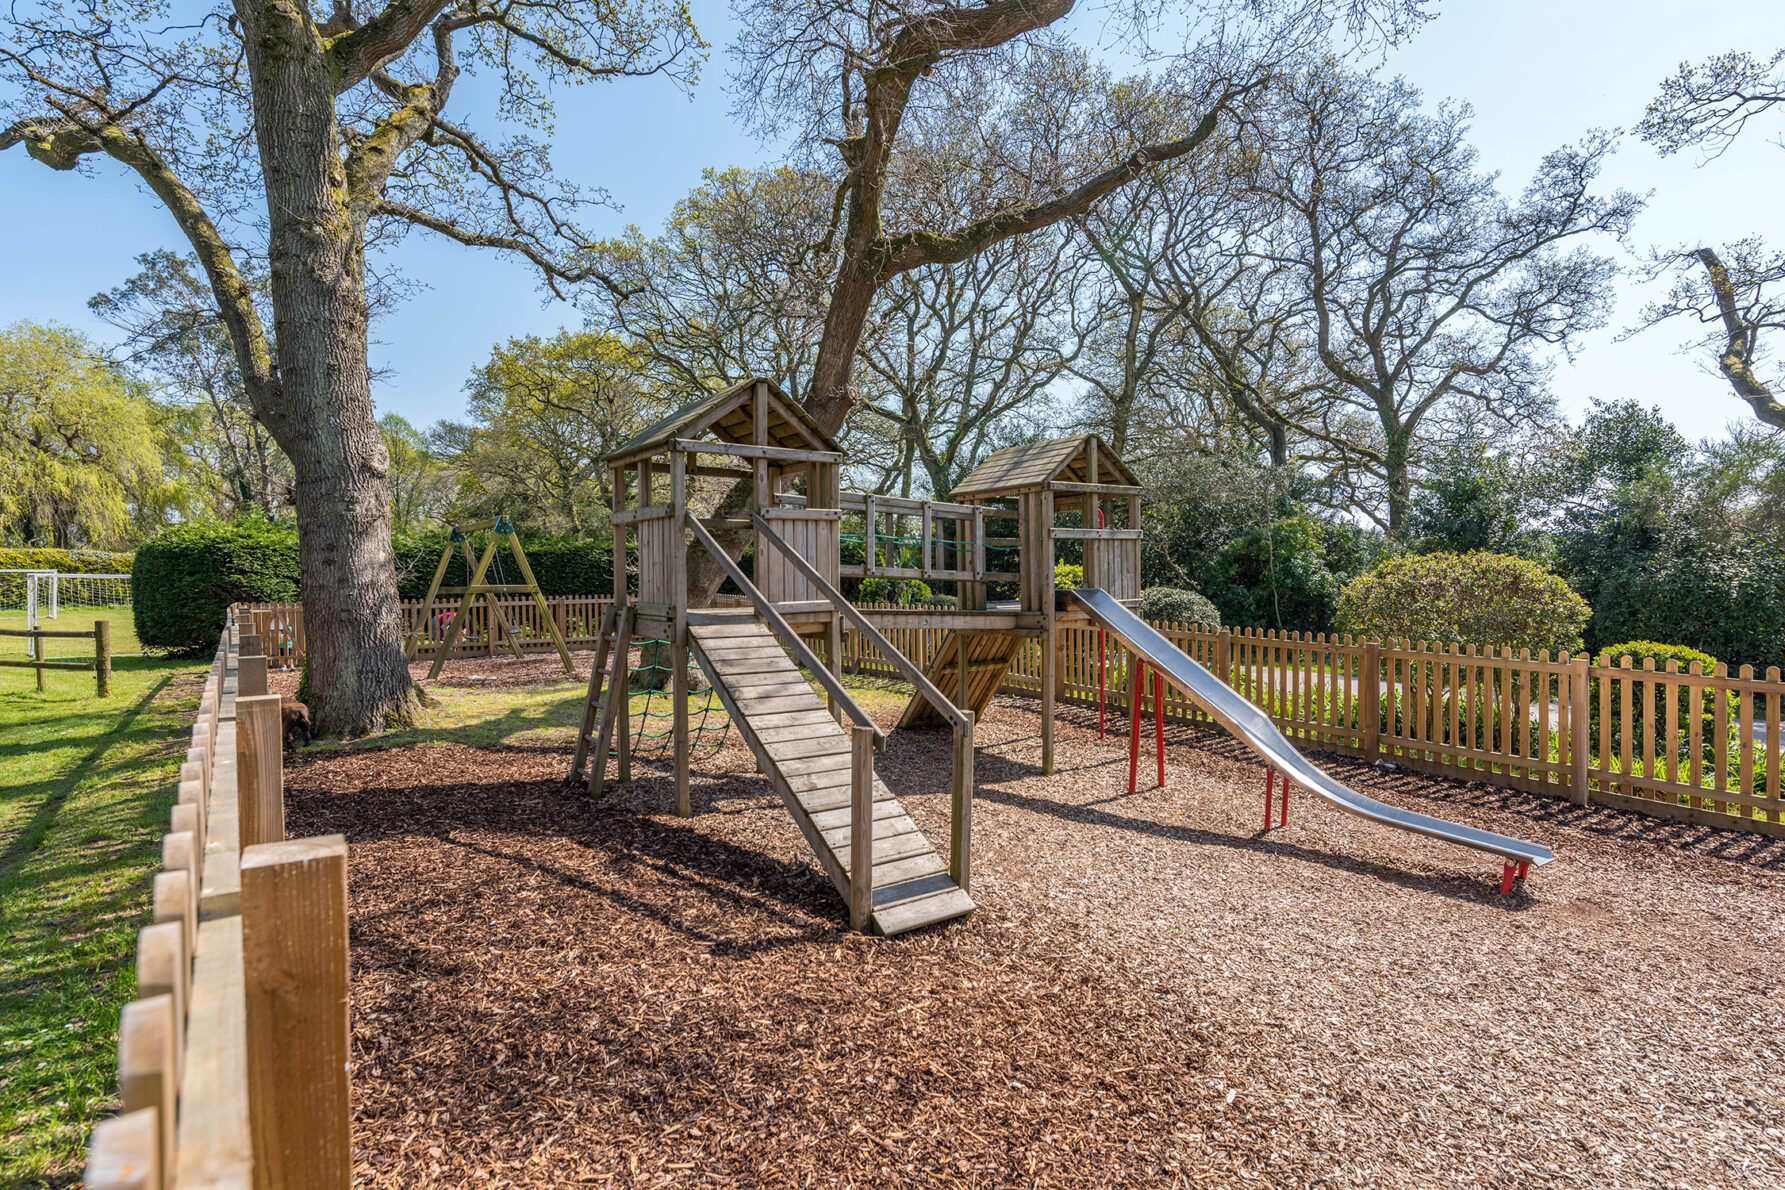 Children's play area at sandyholme holiday park in dorset